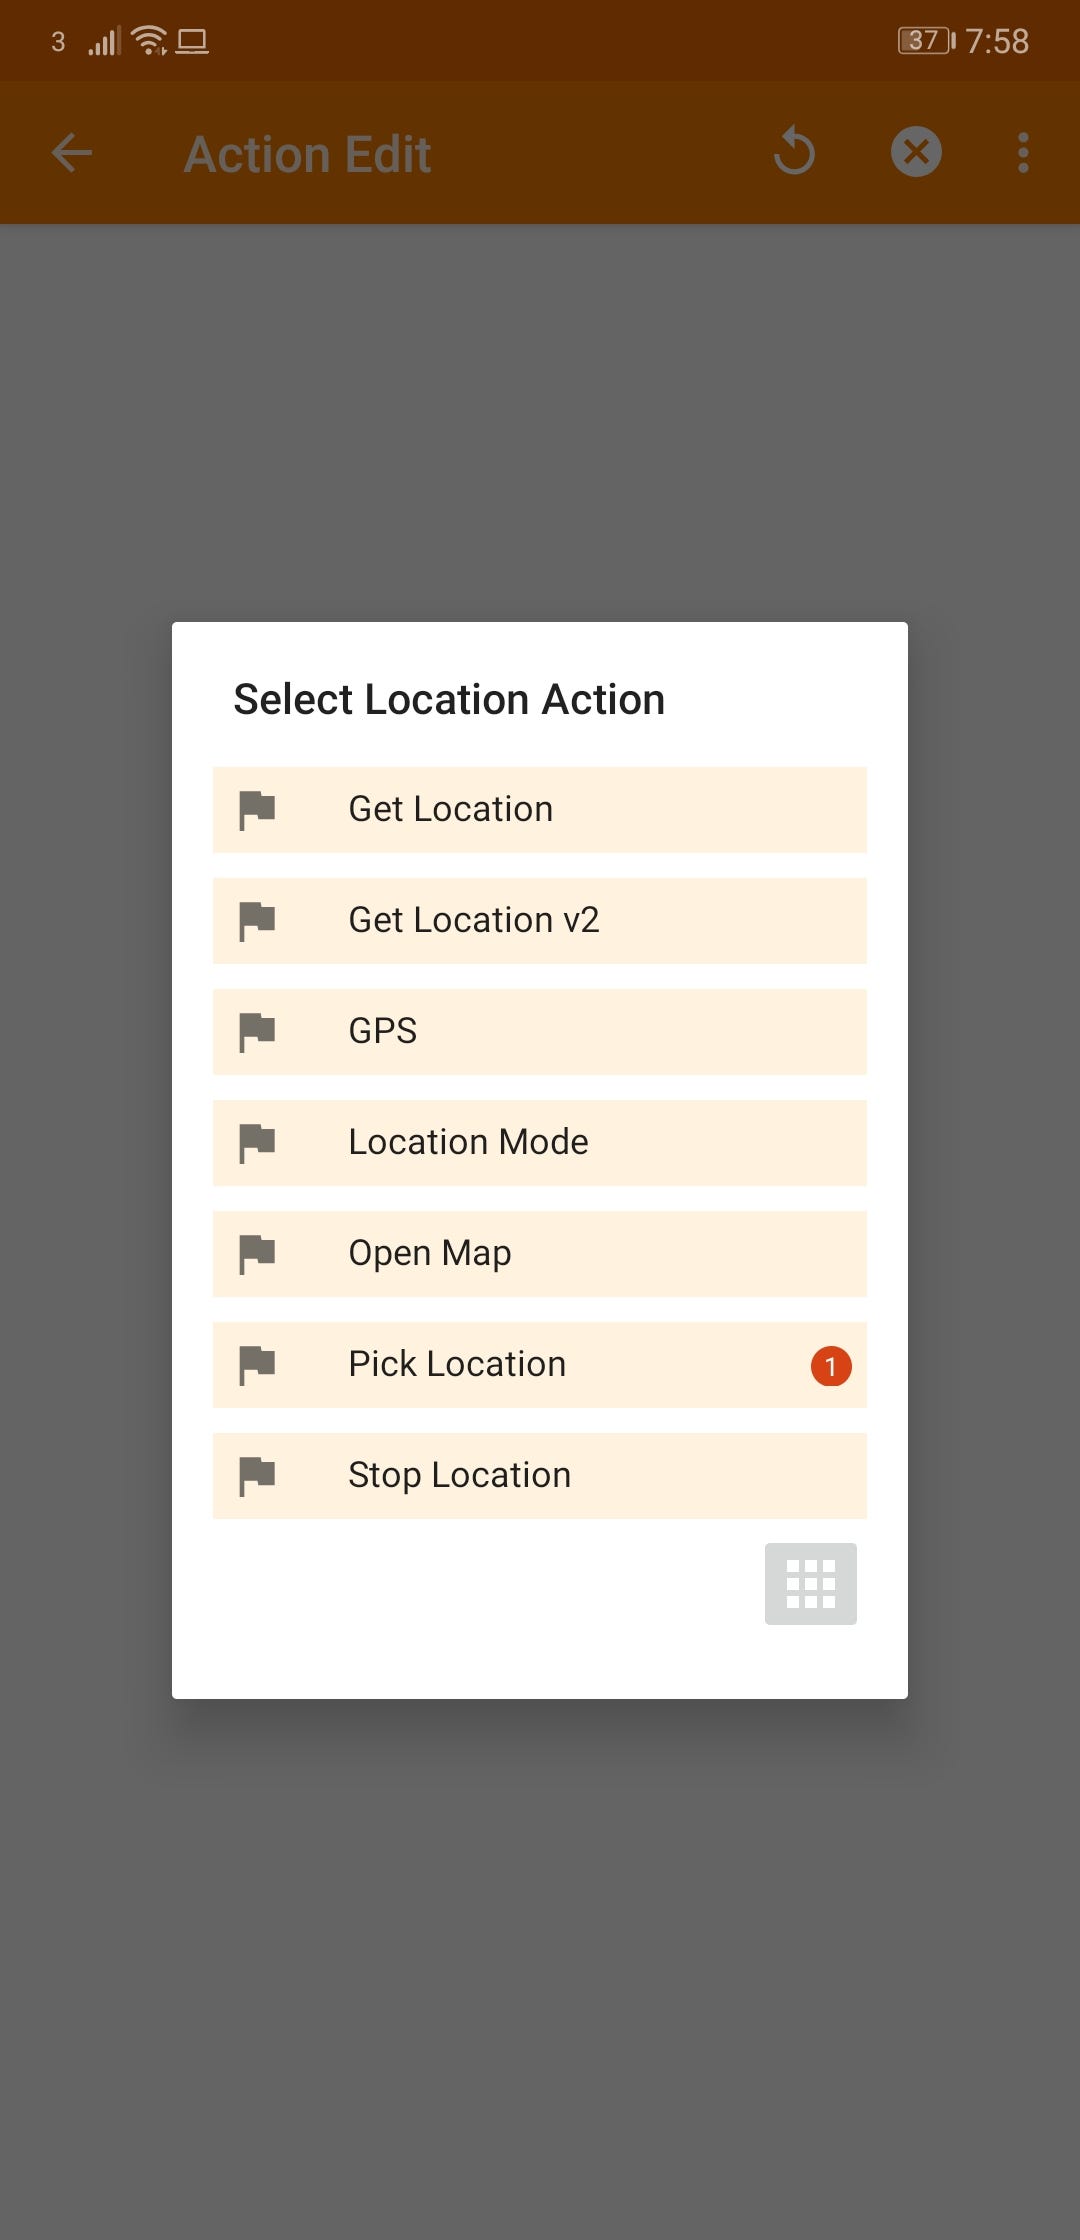 binding publikum Tidsplan Track your Android location remotely via SMS using automation with Tasker |  by Thomas Chaplin | Medium